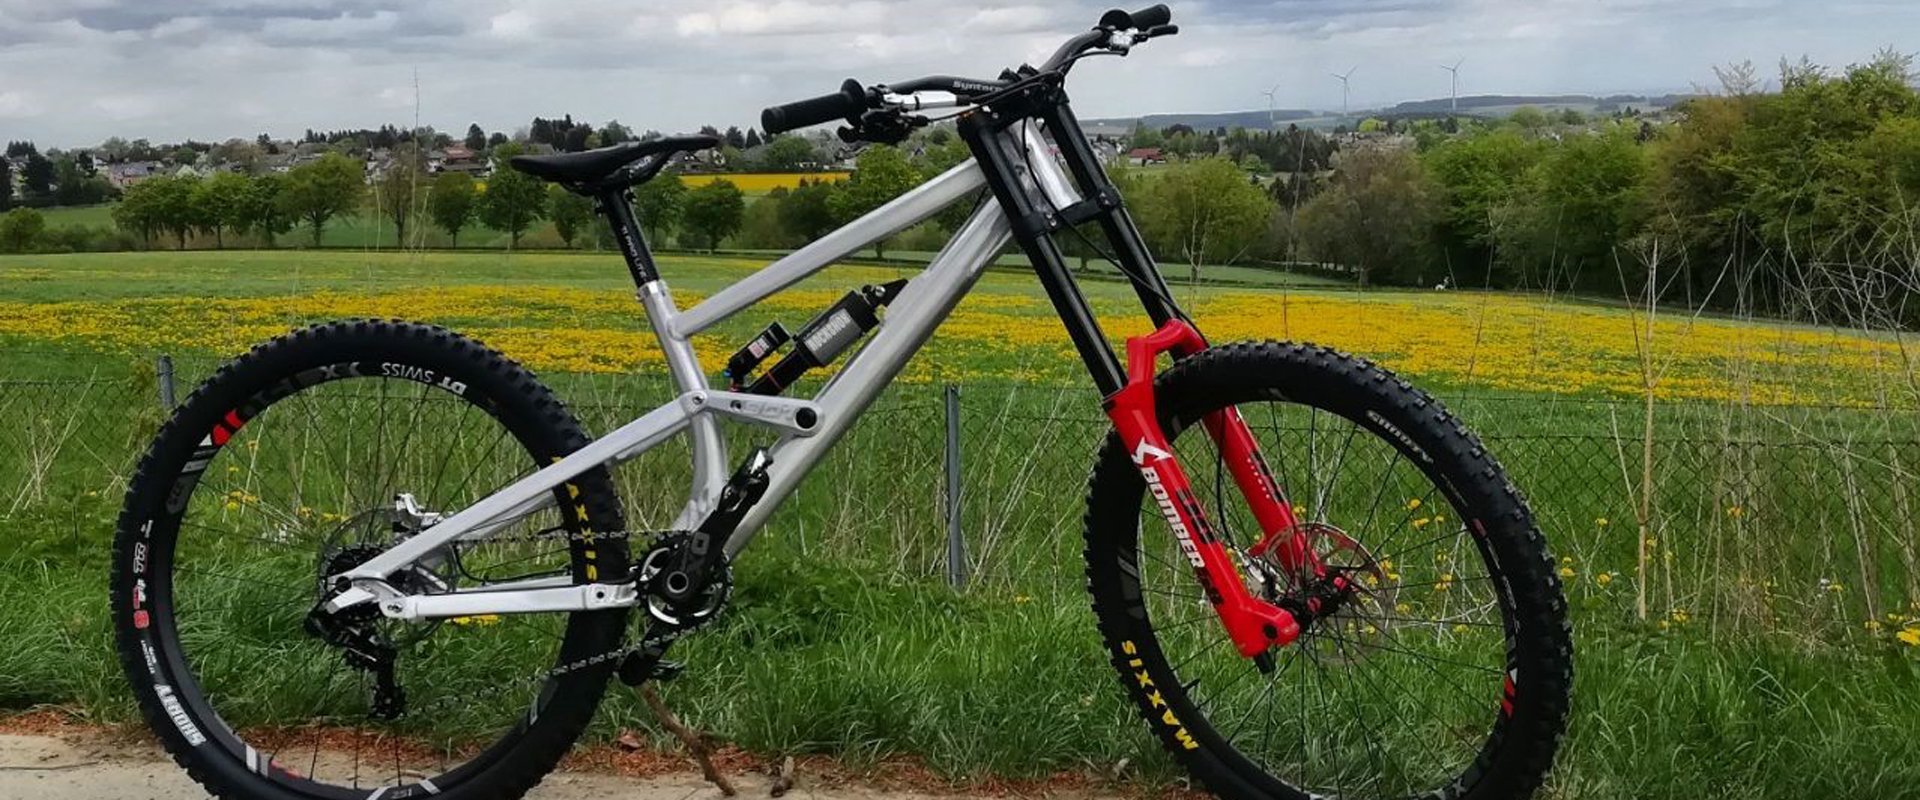 A Liteville 901 Downhill MTB bicycle.